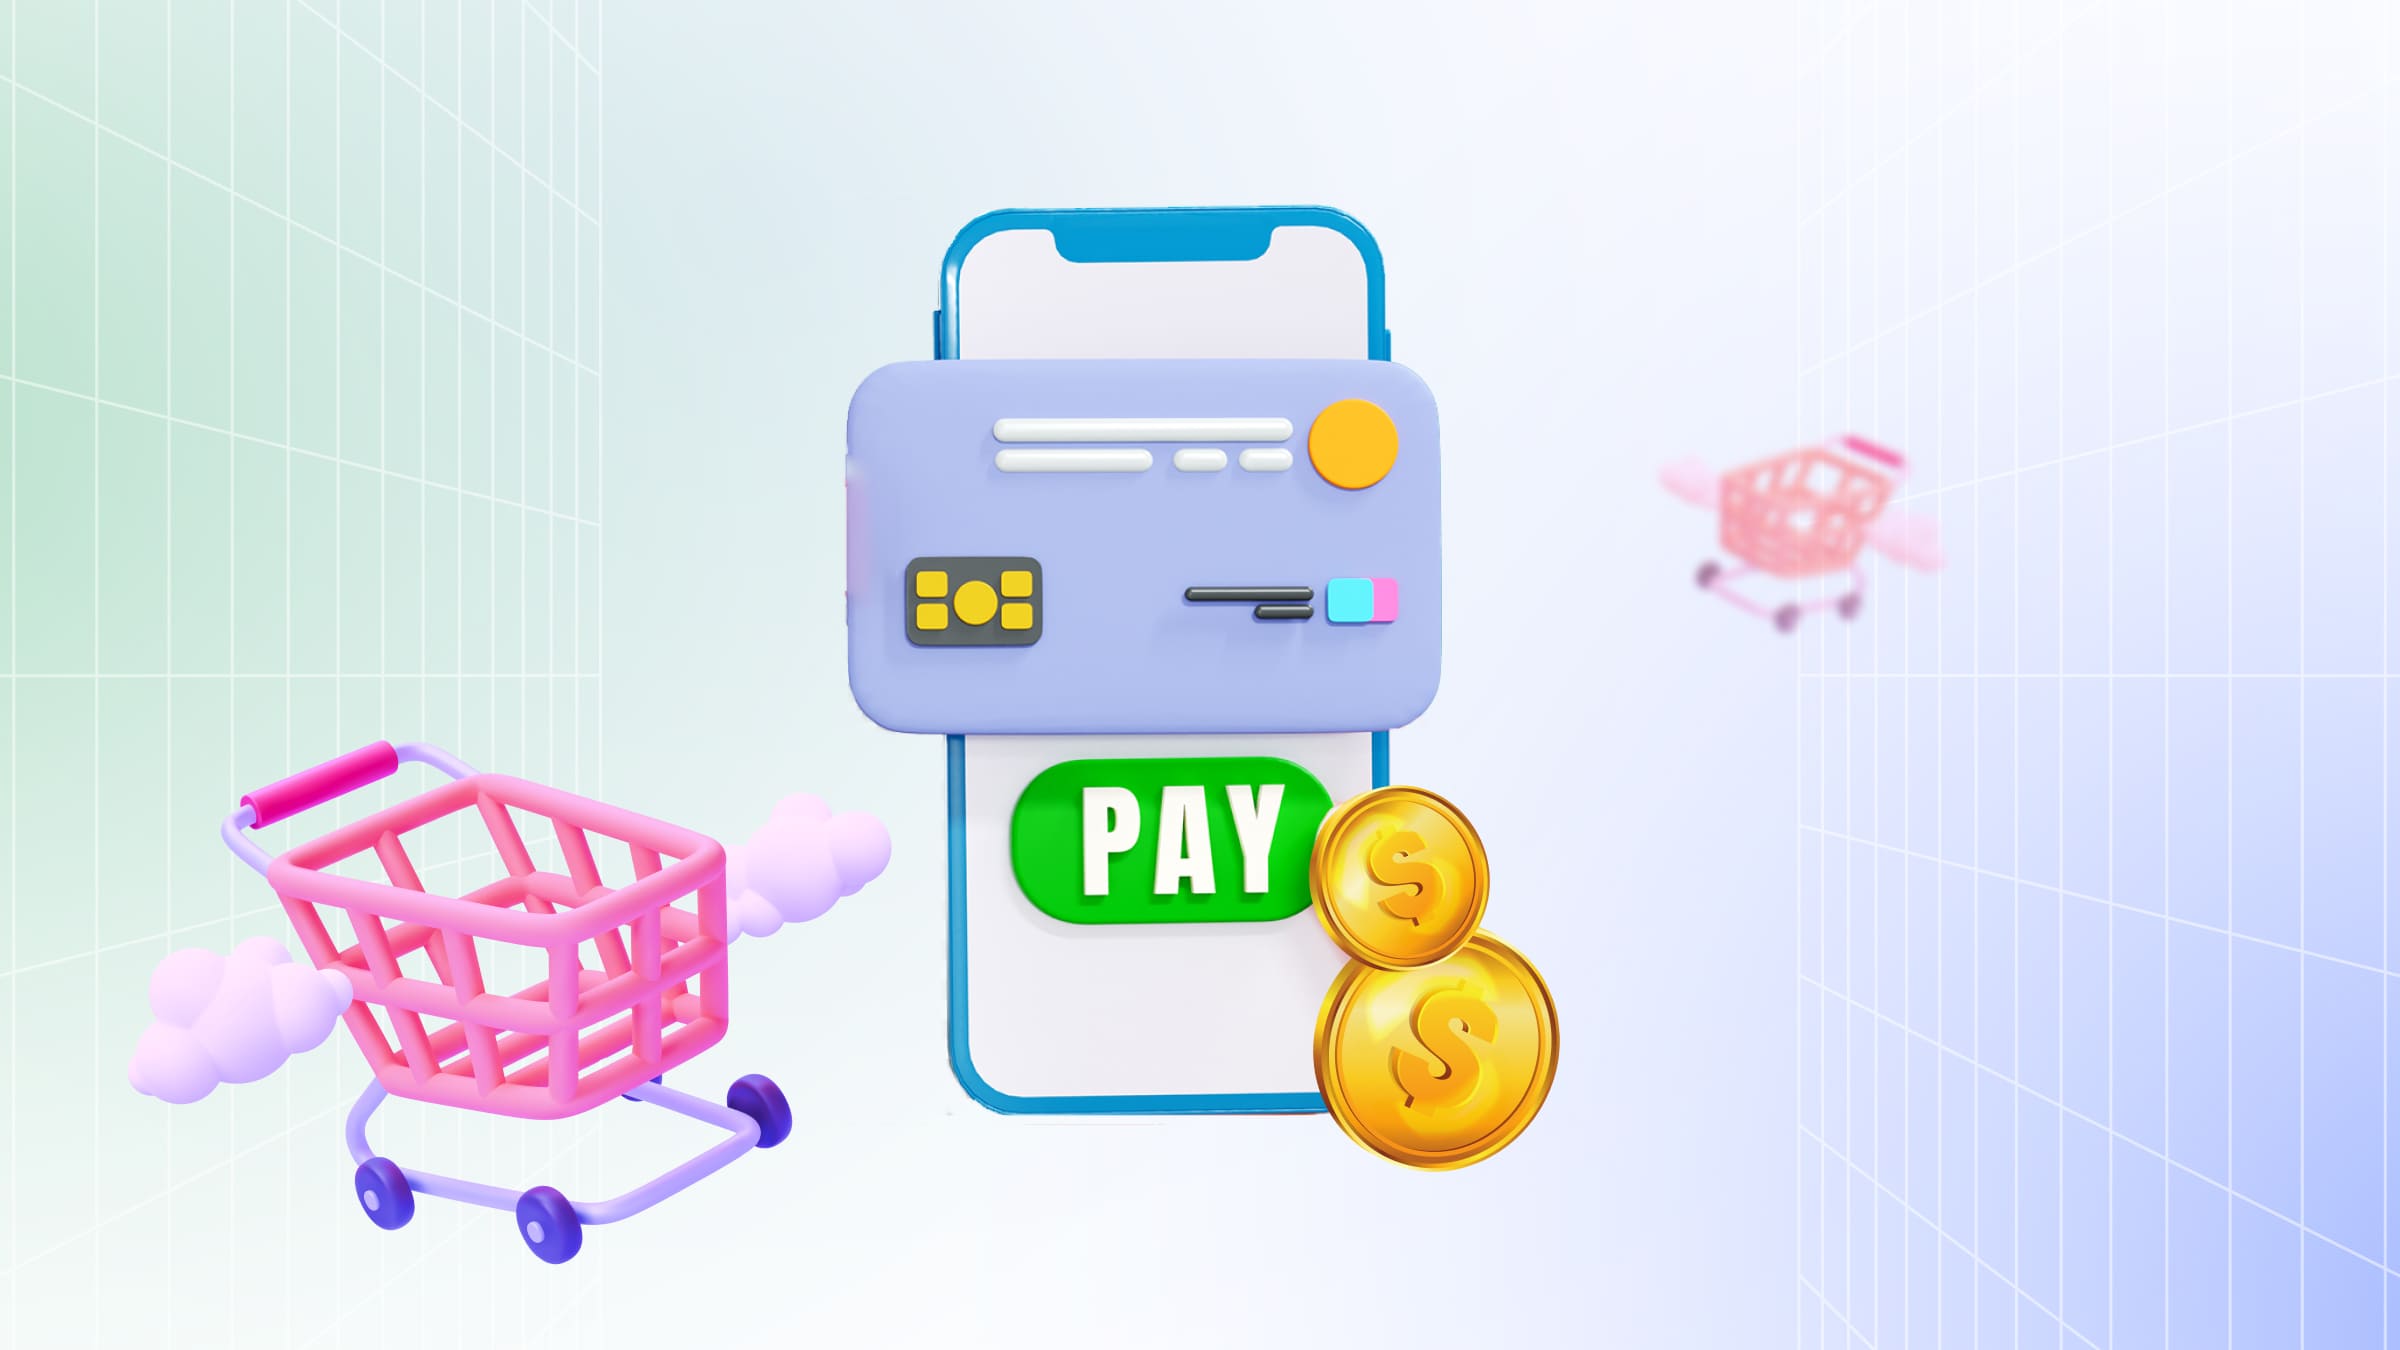 Many online payment services allow customers to pay for purchases using installments.